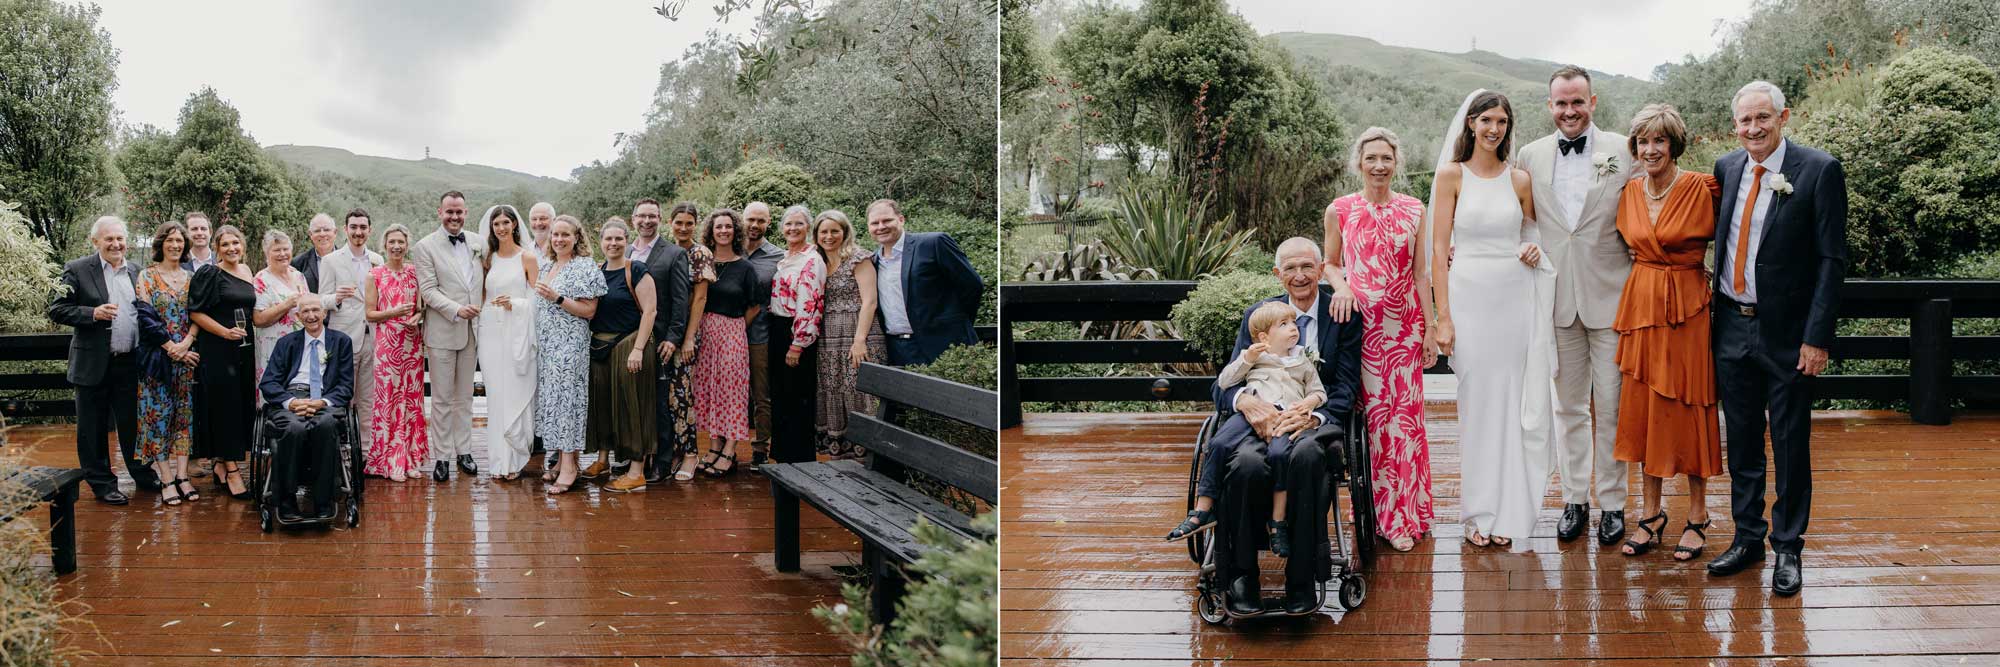 Wedding Party photos at Bracu Estate in Auckland photo by Sarah Weber Photography